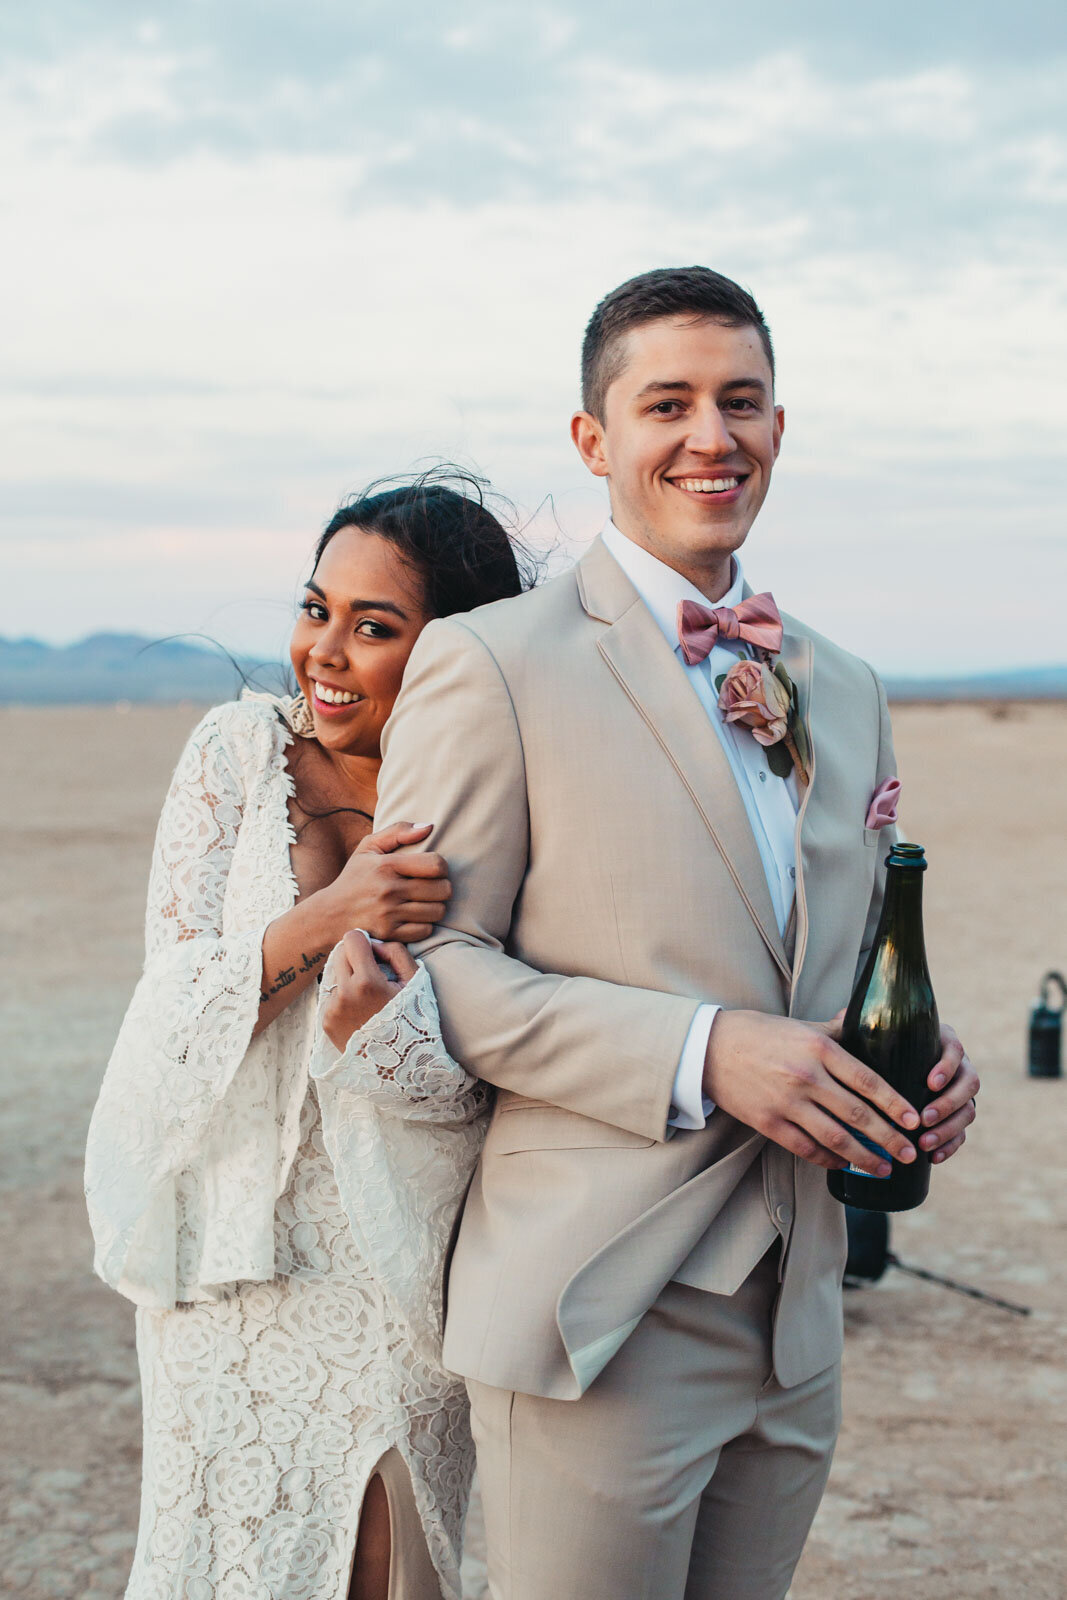 Couple popping champagne in the desert